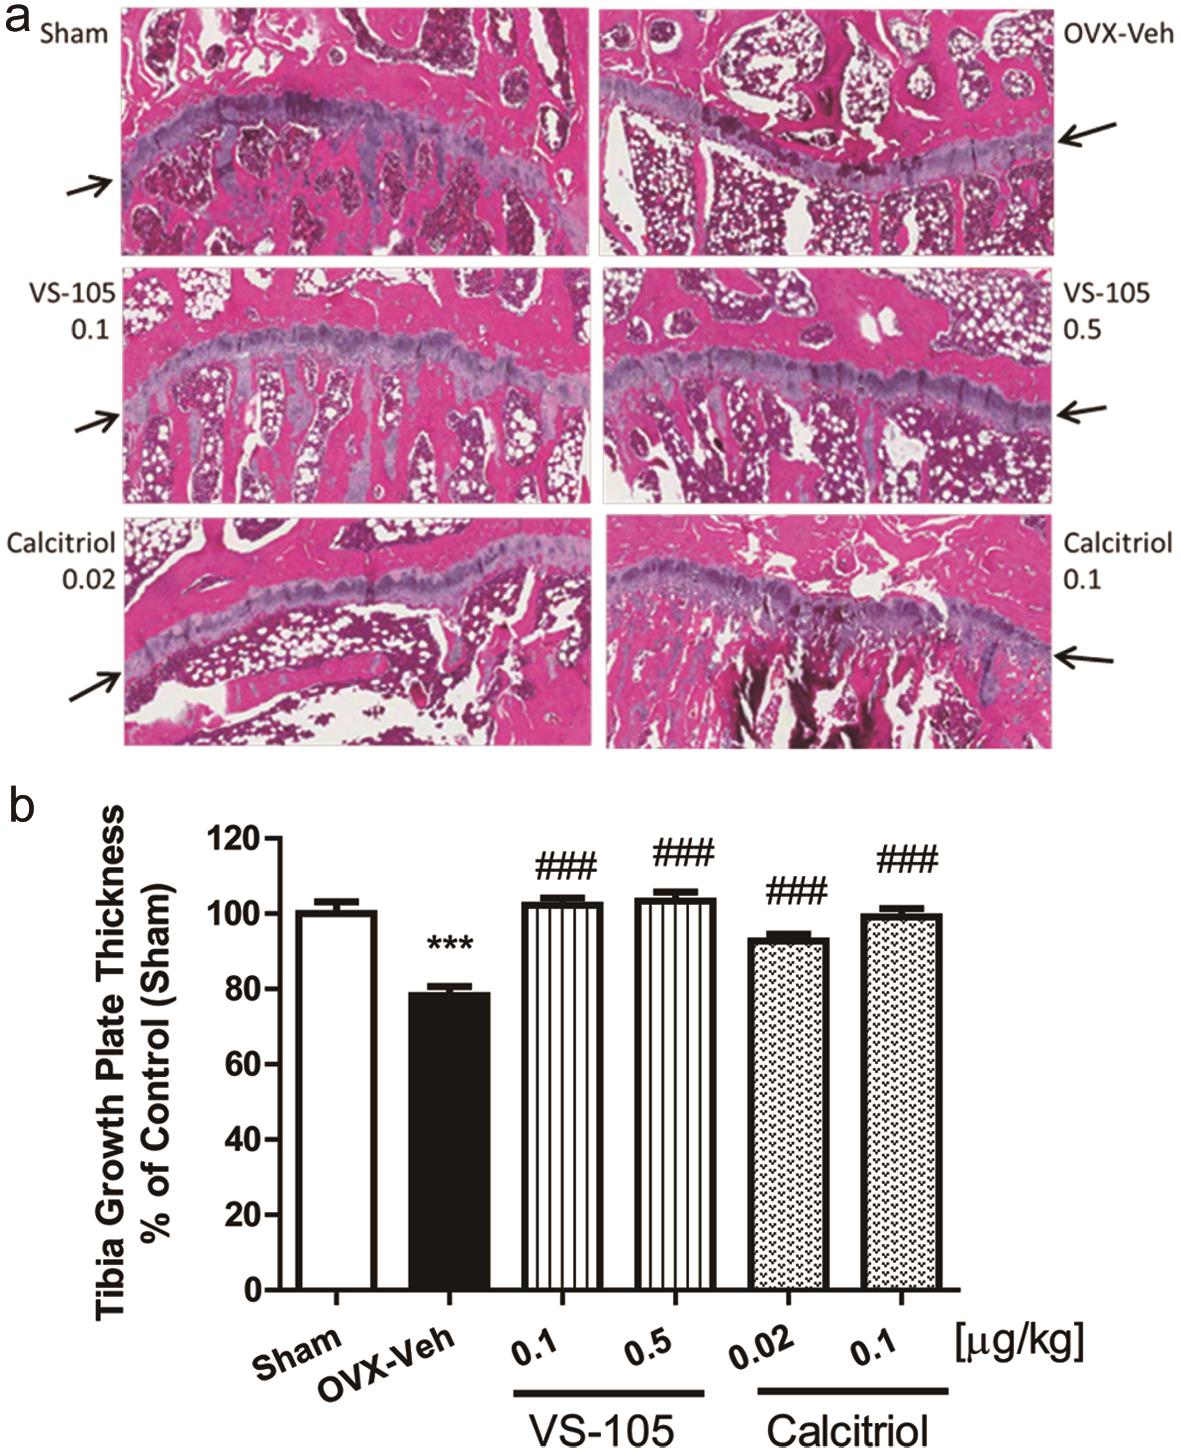 Effects of VS-105 and calcitriol on tibia growth plate thickness in OVX rats.